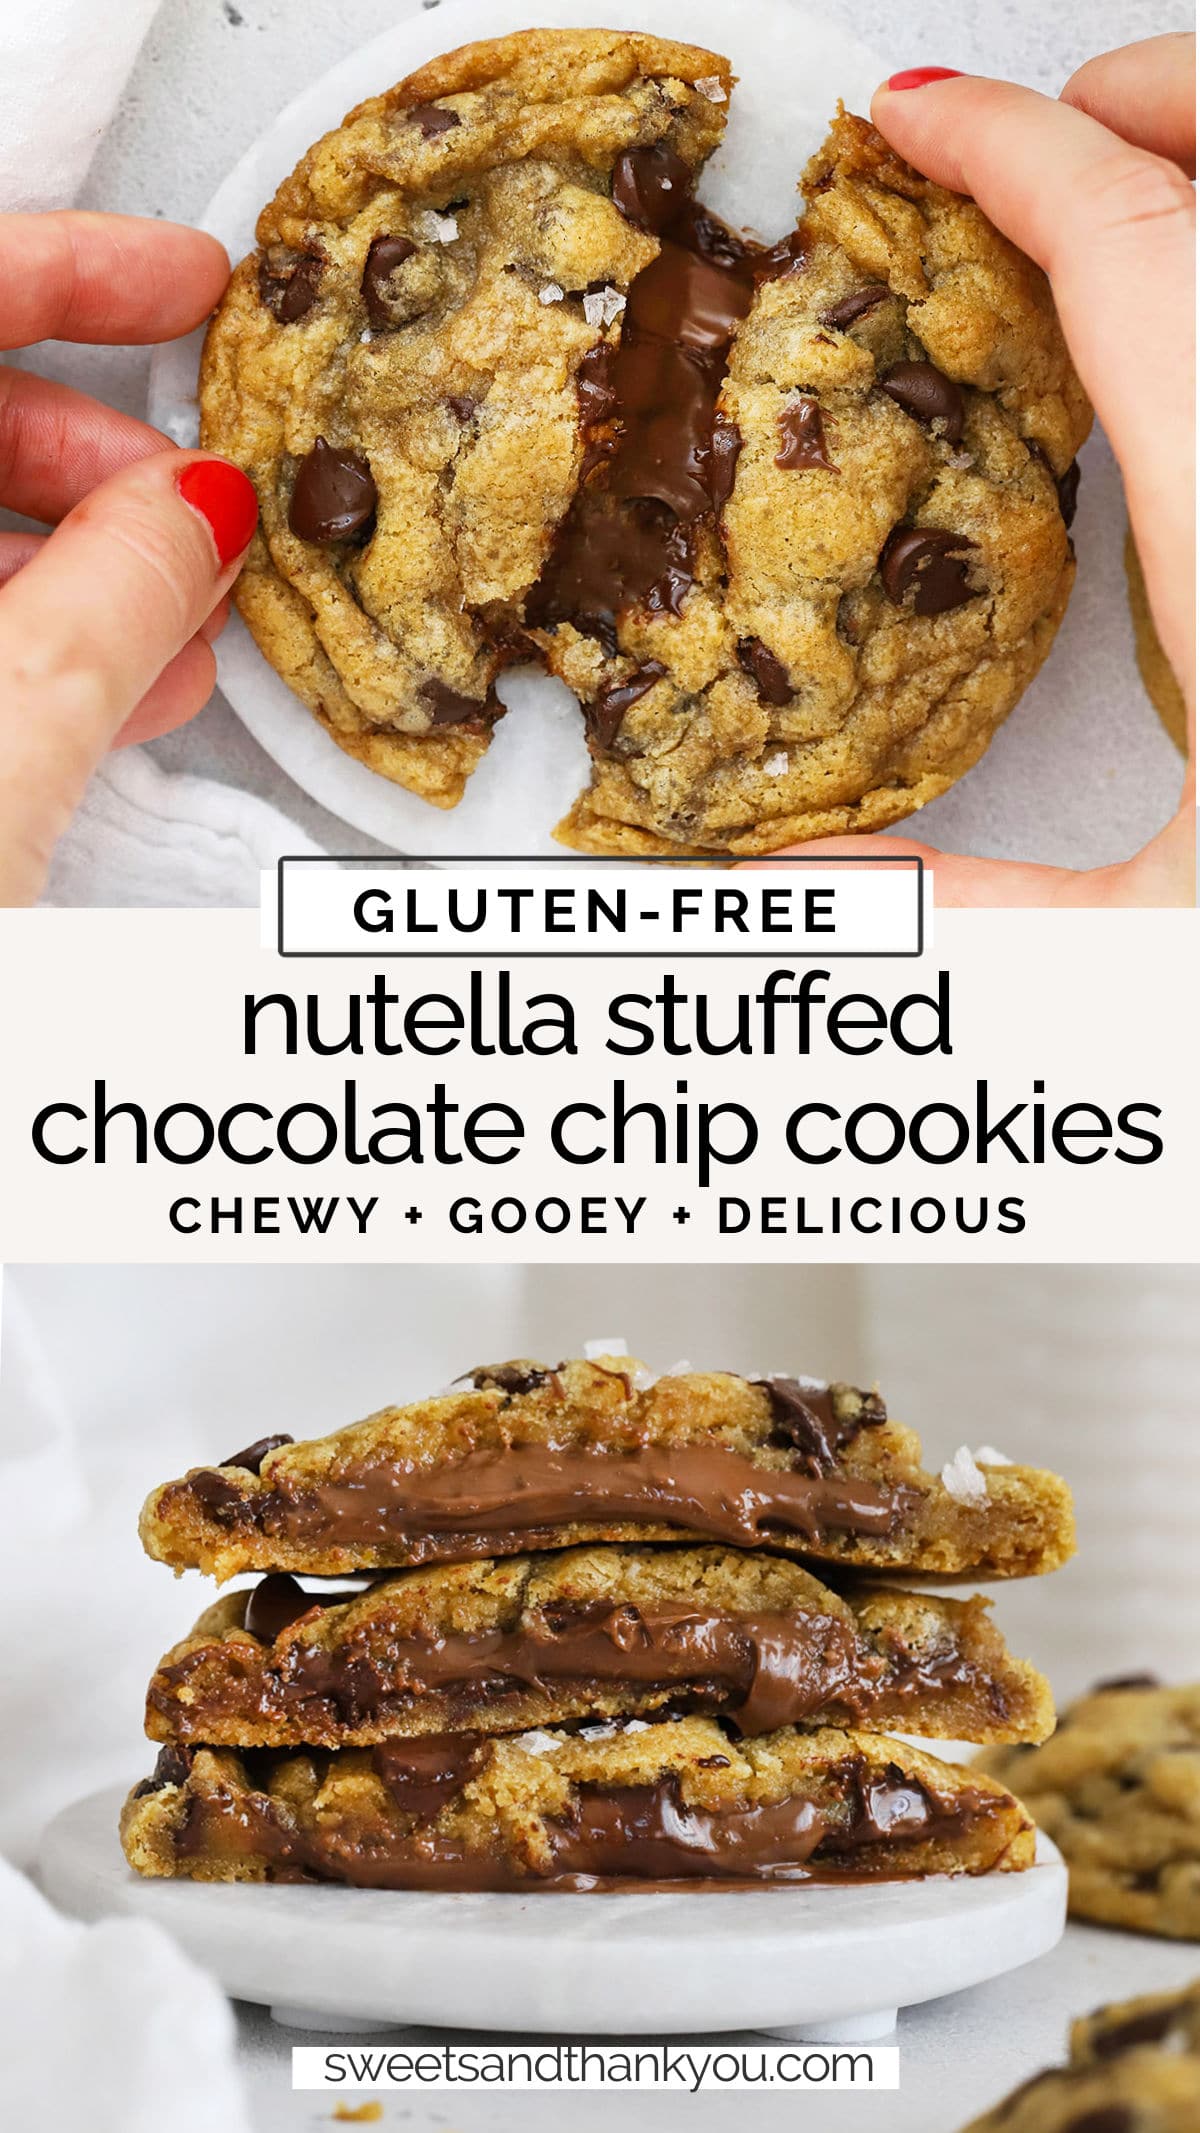 Gluten-Free Nutella-Stuffed Chocolate Chip Cookies. Chewy gluten-free brown butter chocolate chip cookies stuffed with Nutella make for one show-stopping dessert! / gluten-free nutella cookies / nutella-stuffed cookies / gluten-free chocolate chip cookies / gluten-free brown butter chocolate chip cookie recipe / nutella recipes / nutella cookie recipe / gluten-free cookies / gluten-free cookie recipe / gluten-free browned butter chocolate chip cookies / gluten free nutella chocolate chip cookies